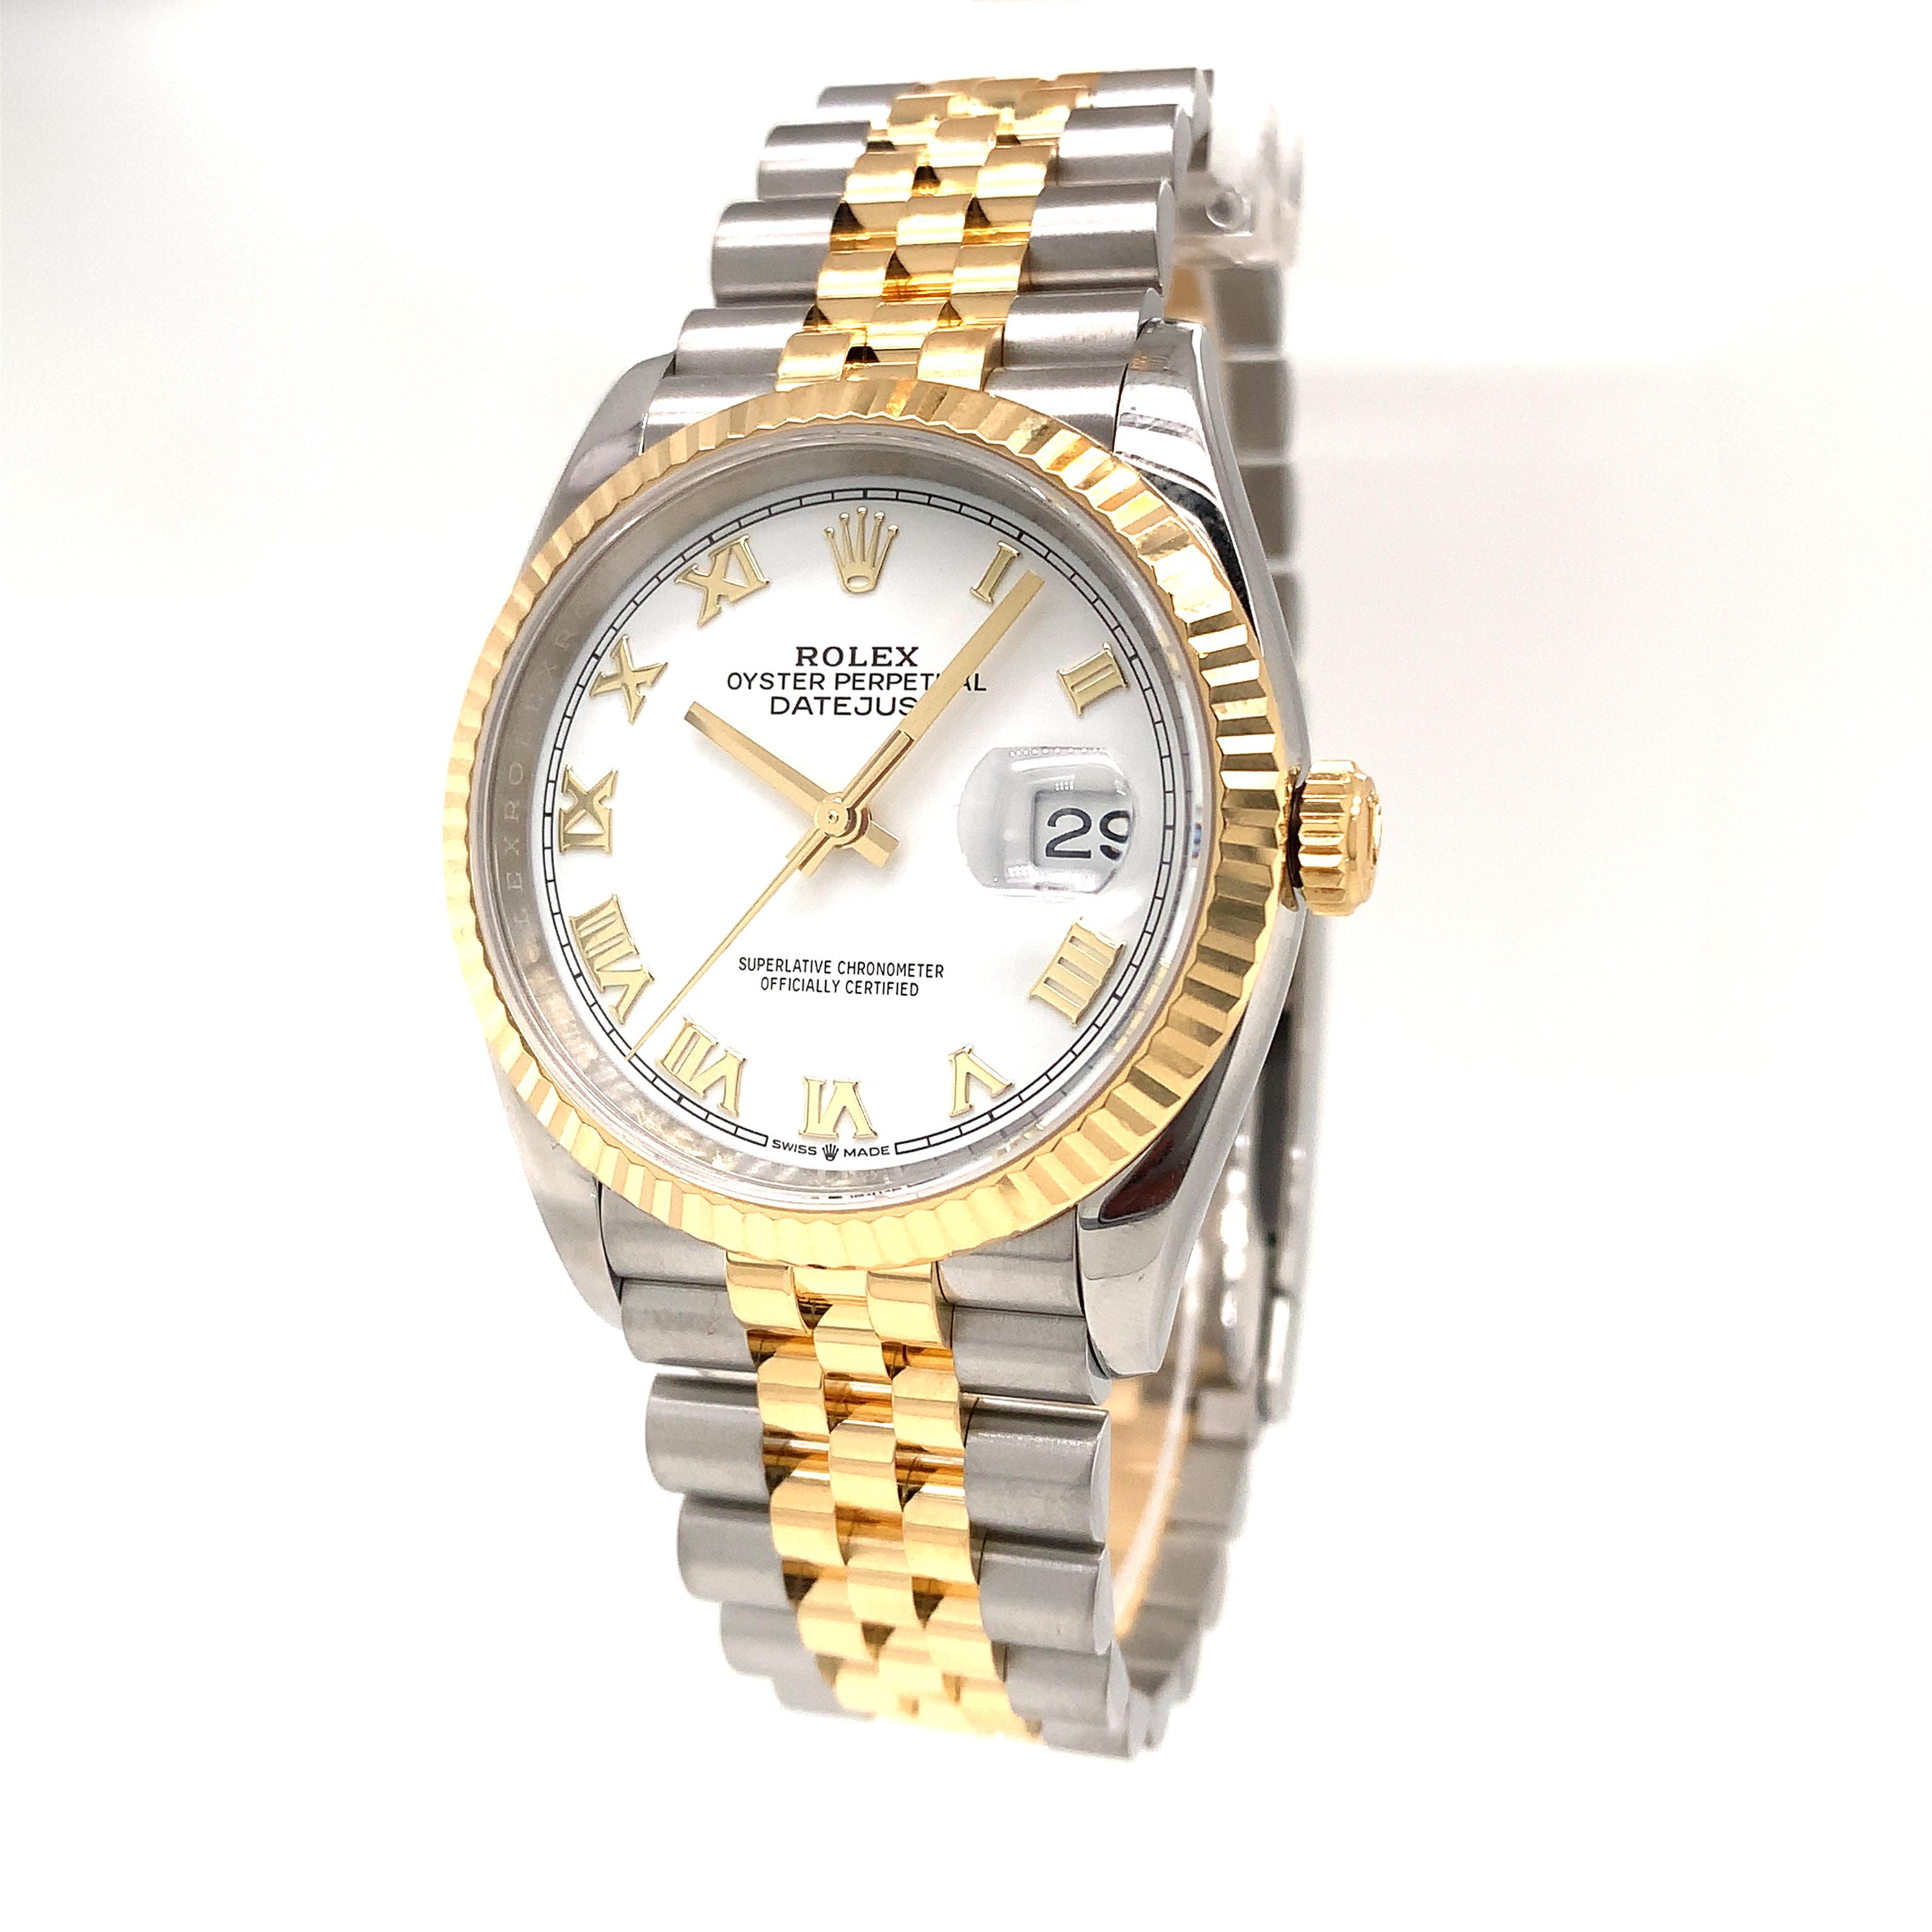 This Oyster Perpetual Datejust 36 in Oystersteel and Yellow gold features a white-color dial with roman numerals and a Jubilee bracelet. The light reflections on the case sides and lugs highlight the elegant profile of the 36 mm Oyster case, which